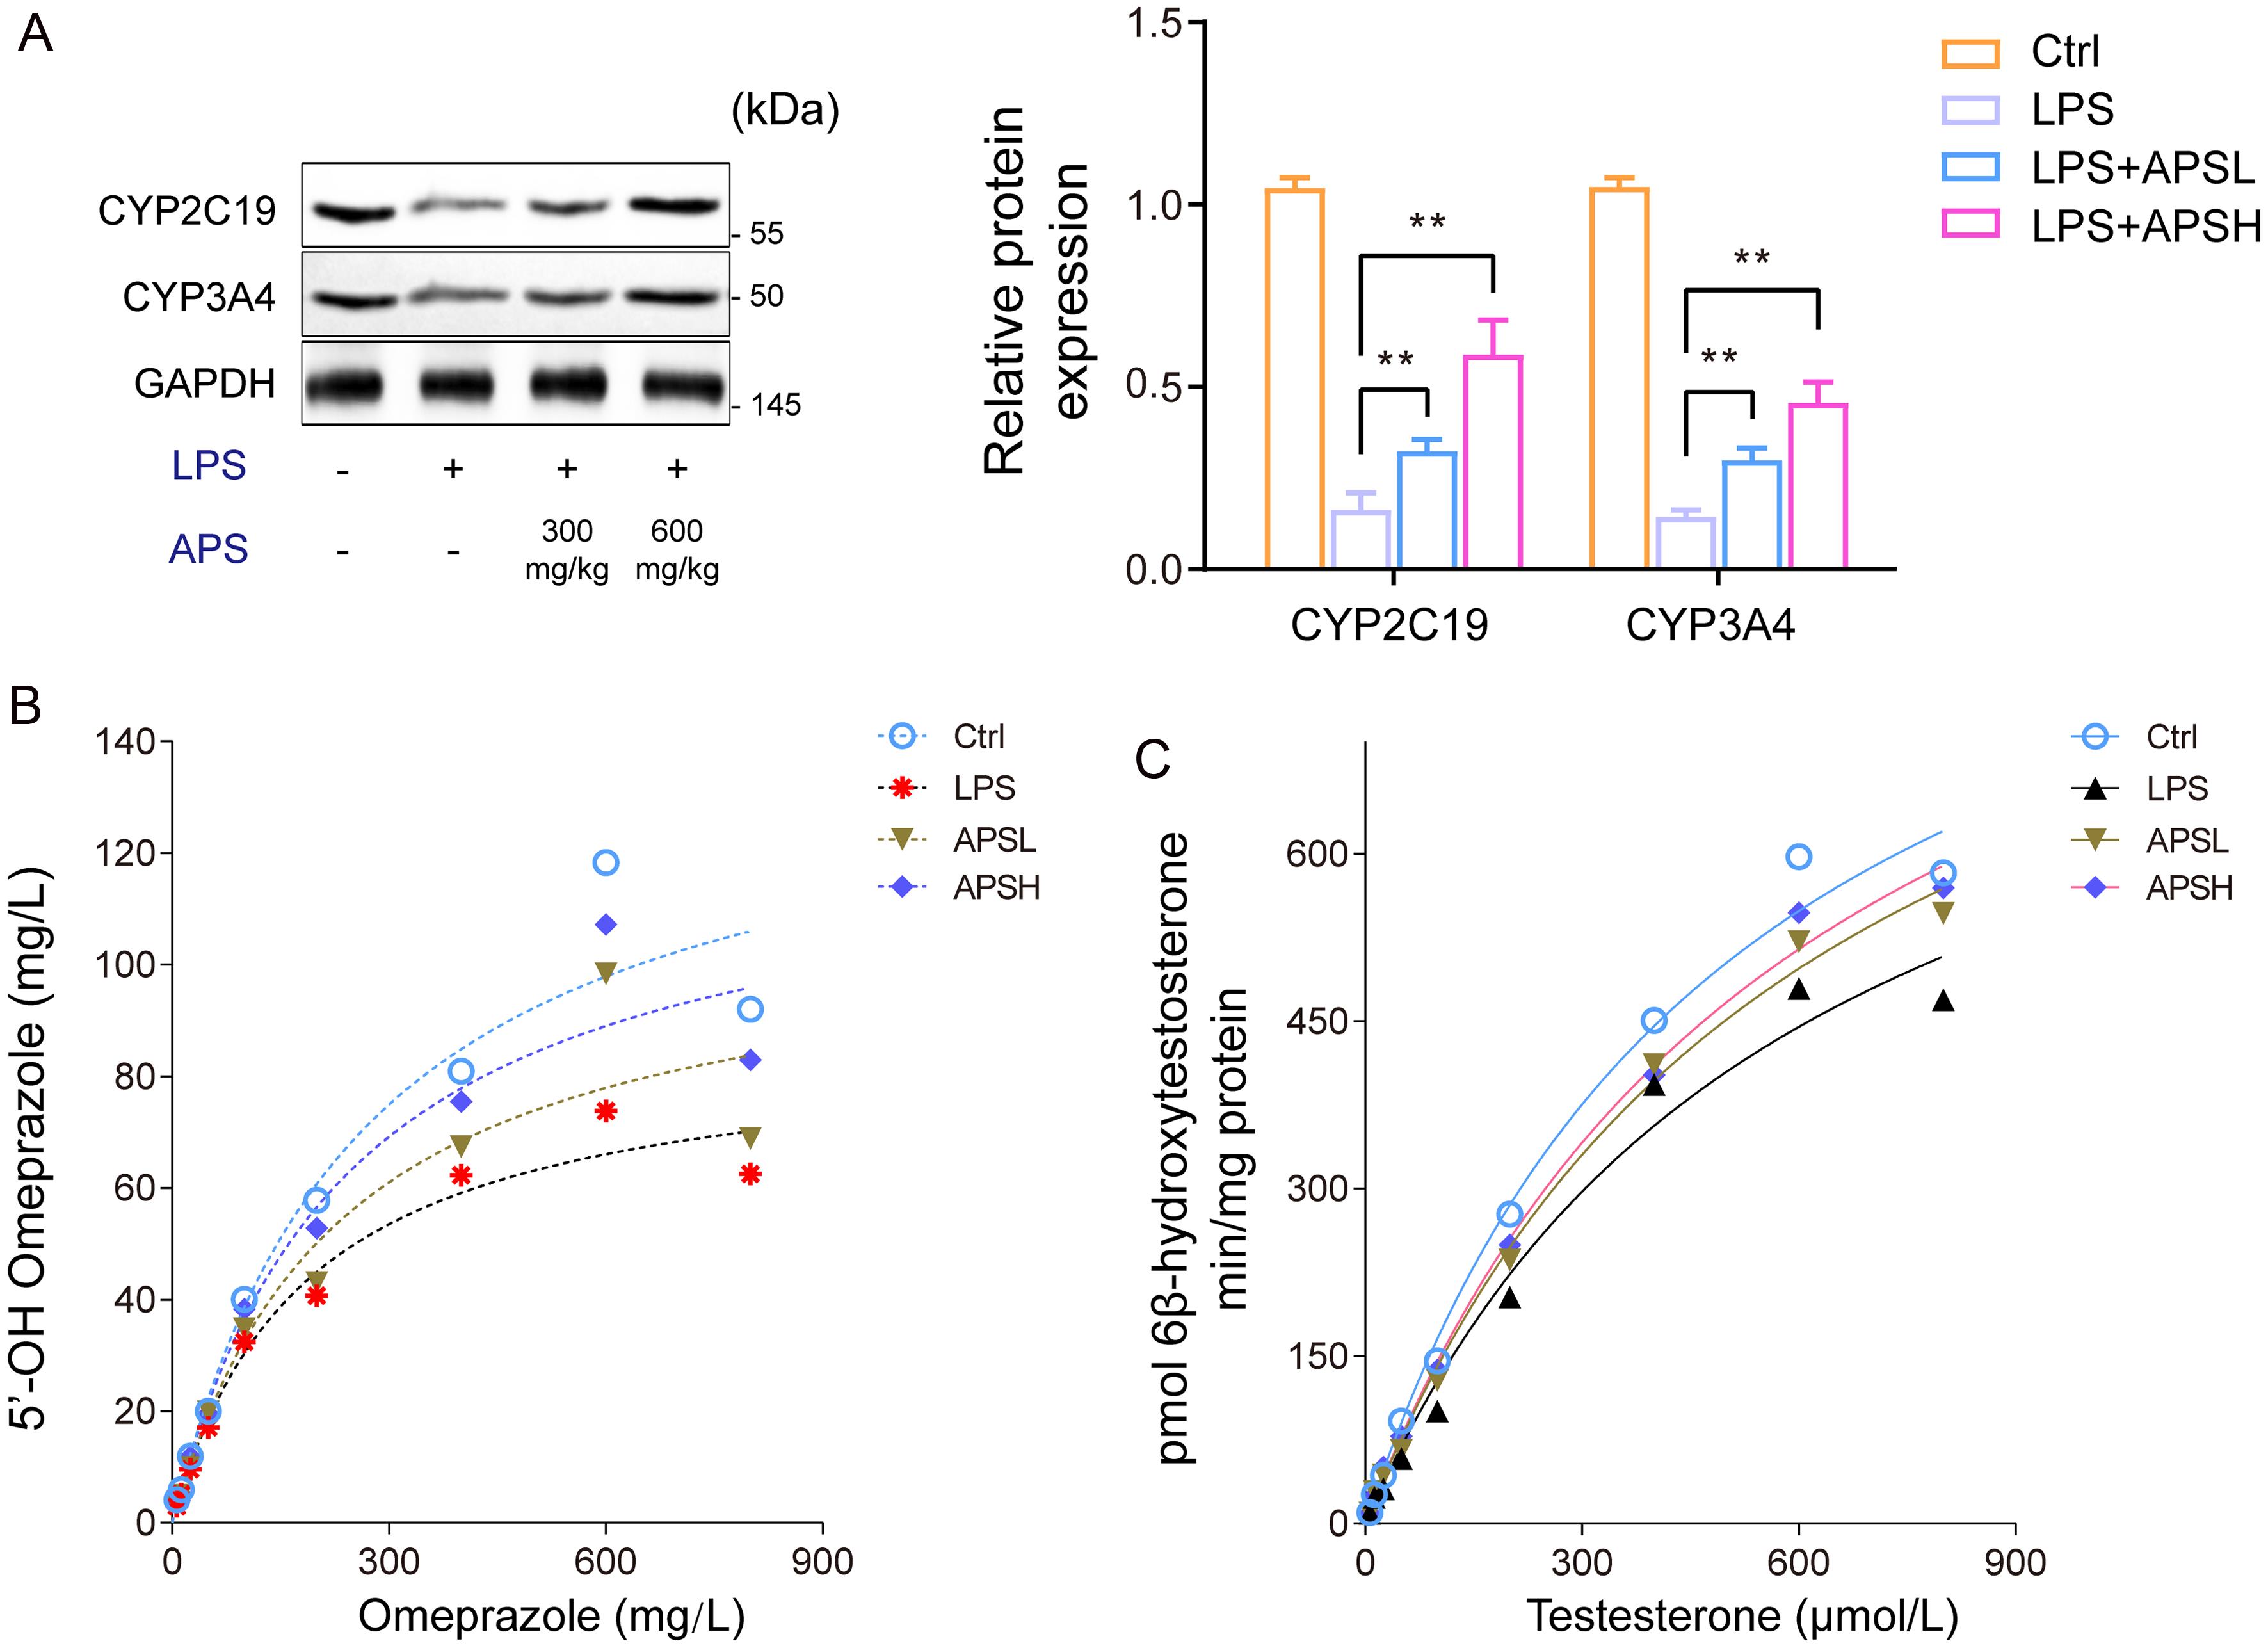 Effects of APS on CYP2C19 and CYP3A4 enzyme expression <italic>in vivo</italic>.